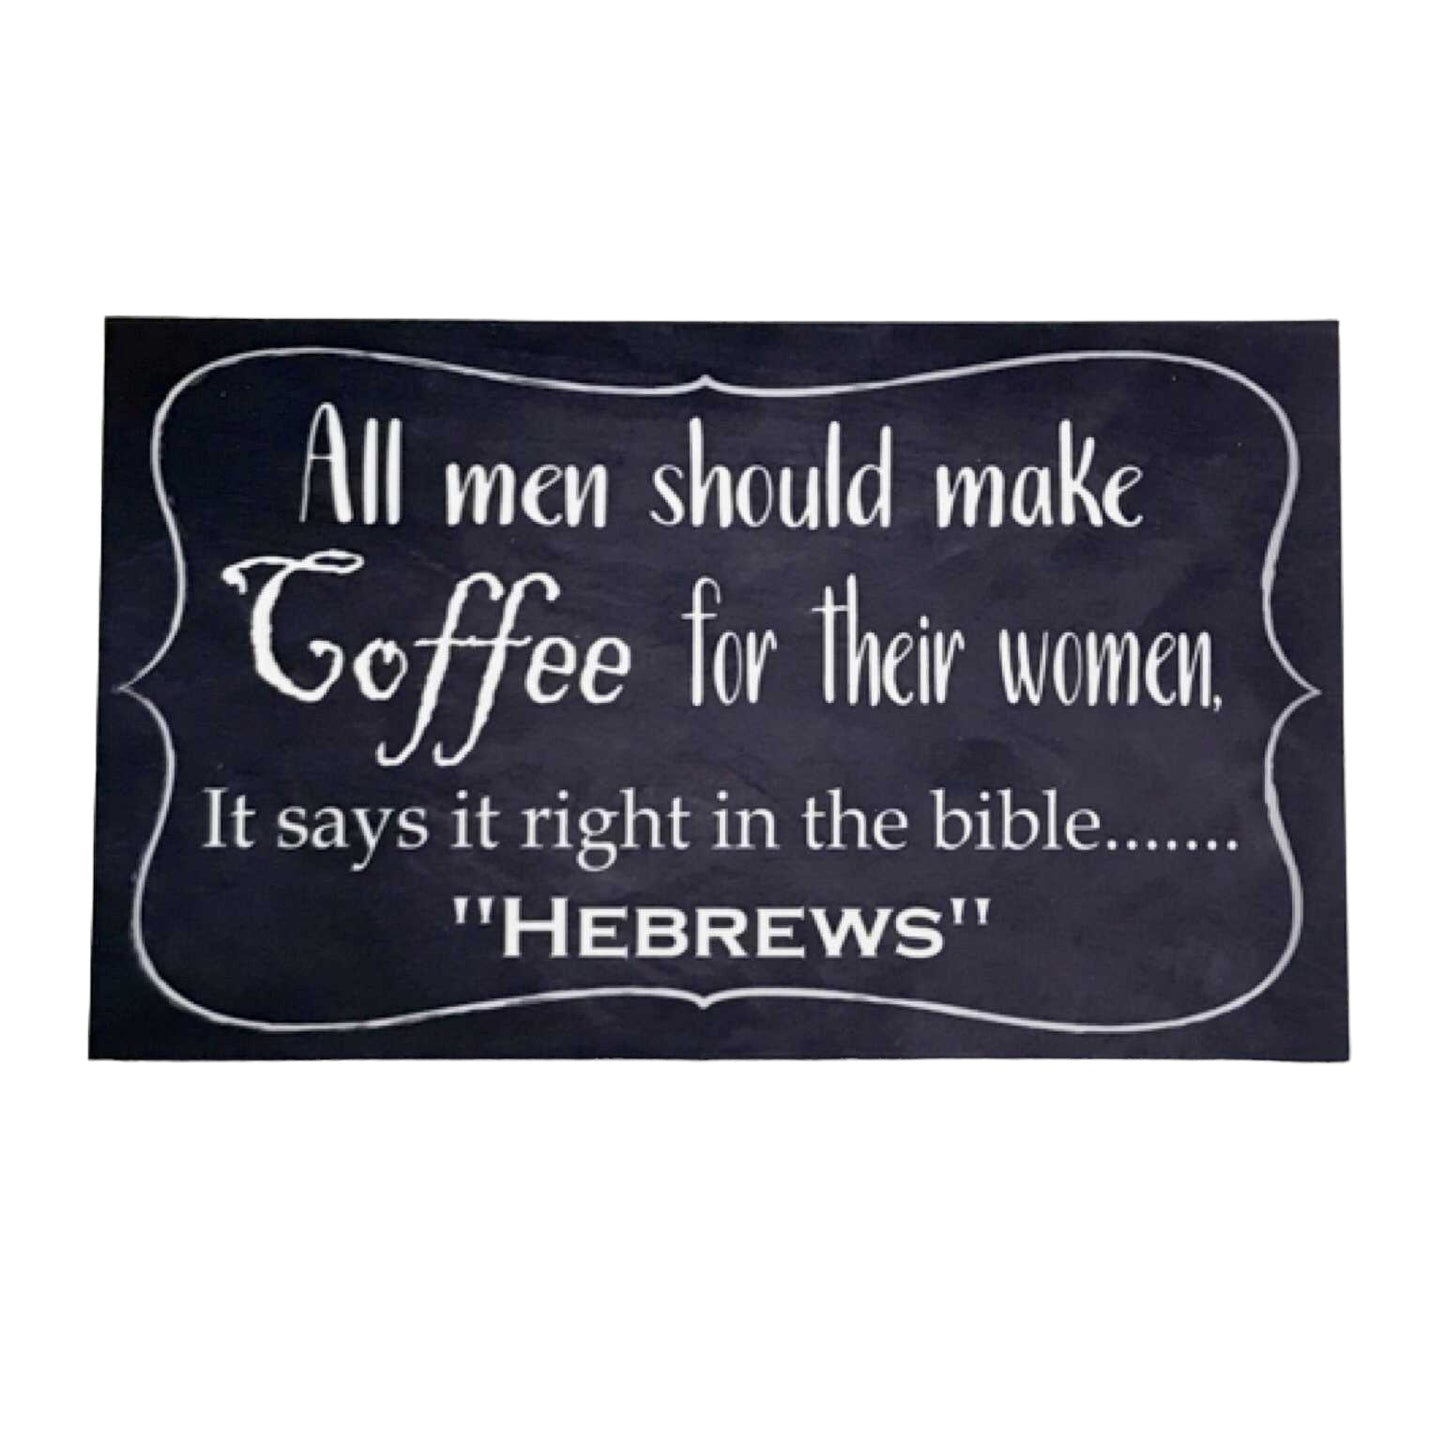 Coffee Hebrews Funny Vintage Retro Sign - The Renmy Store Homewares & Gifts 